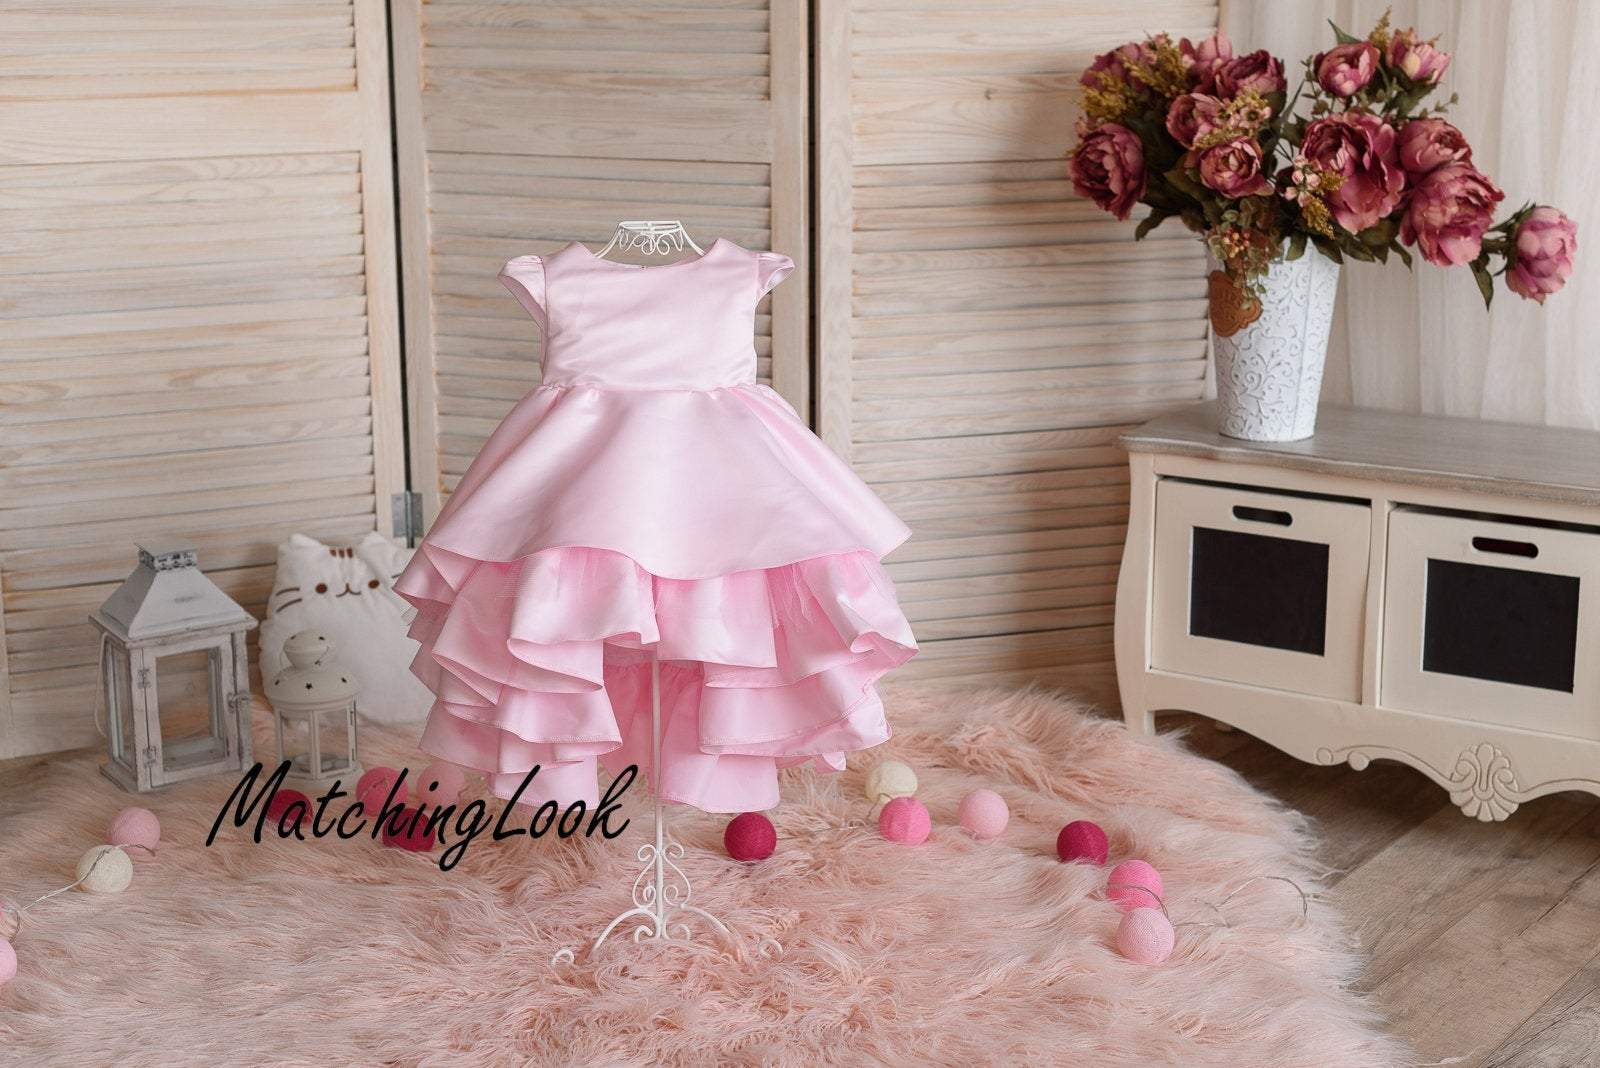 Cute pink dress | Birthday outfit inspo | Dinner dress classy, Dinner gown  styles, Dinner gown